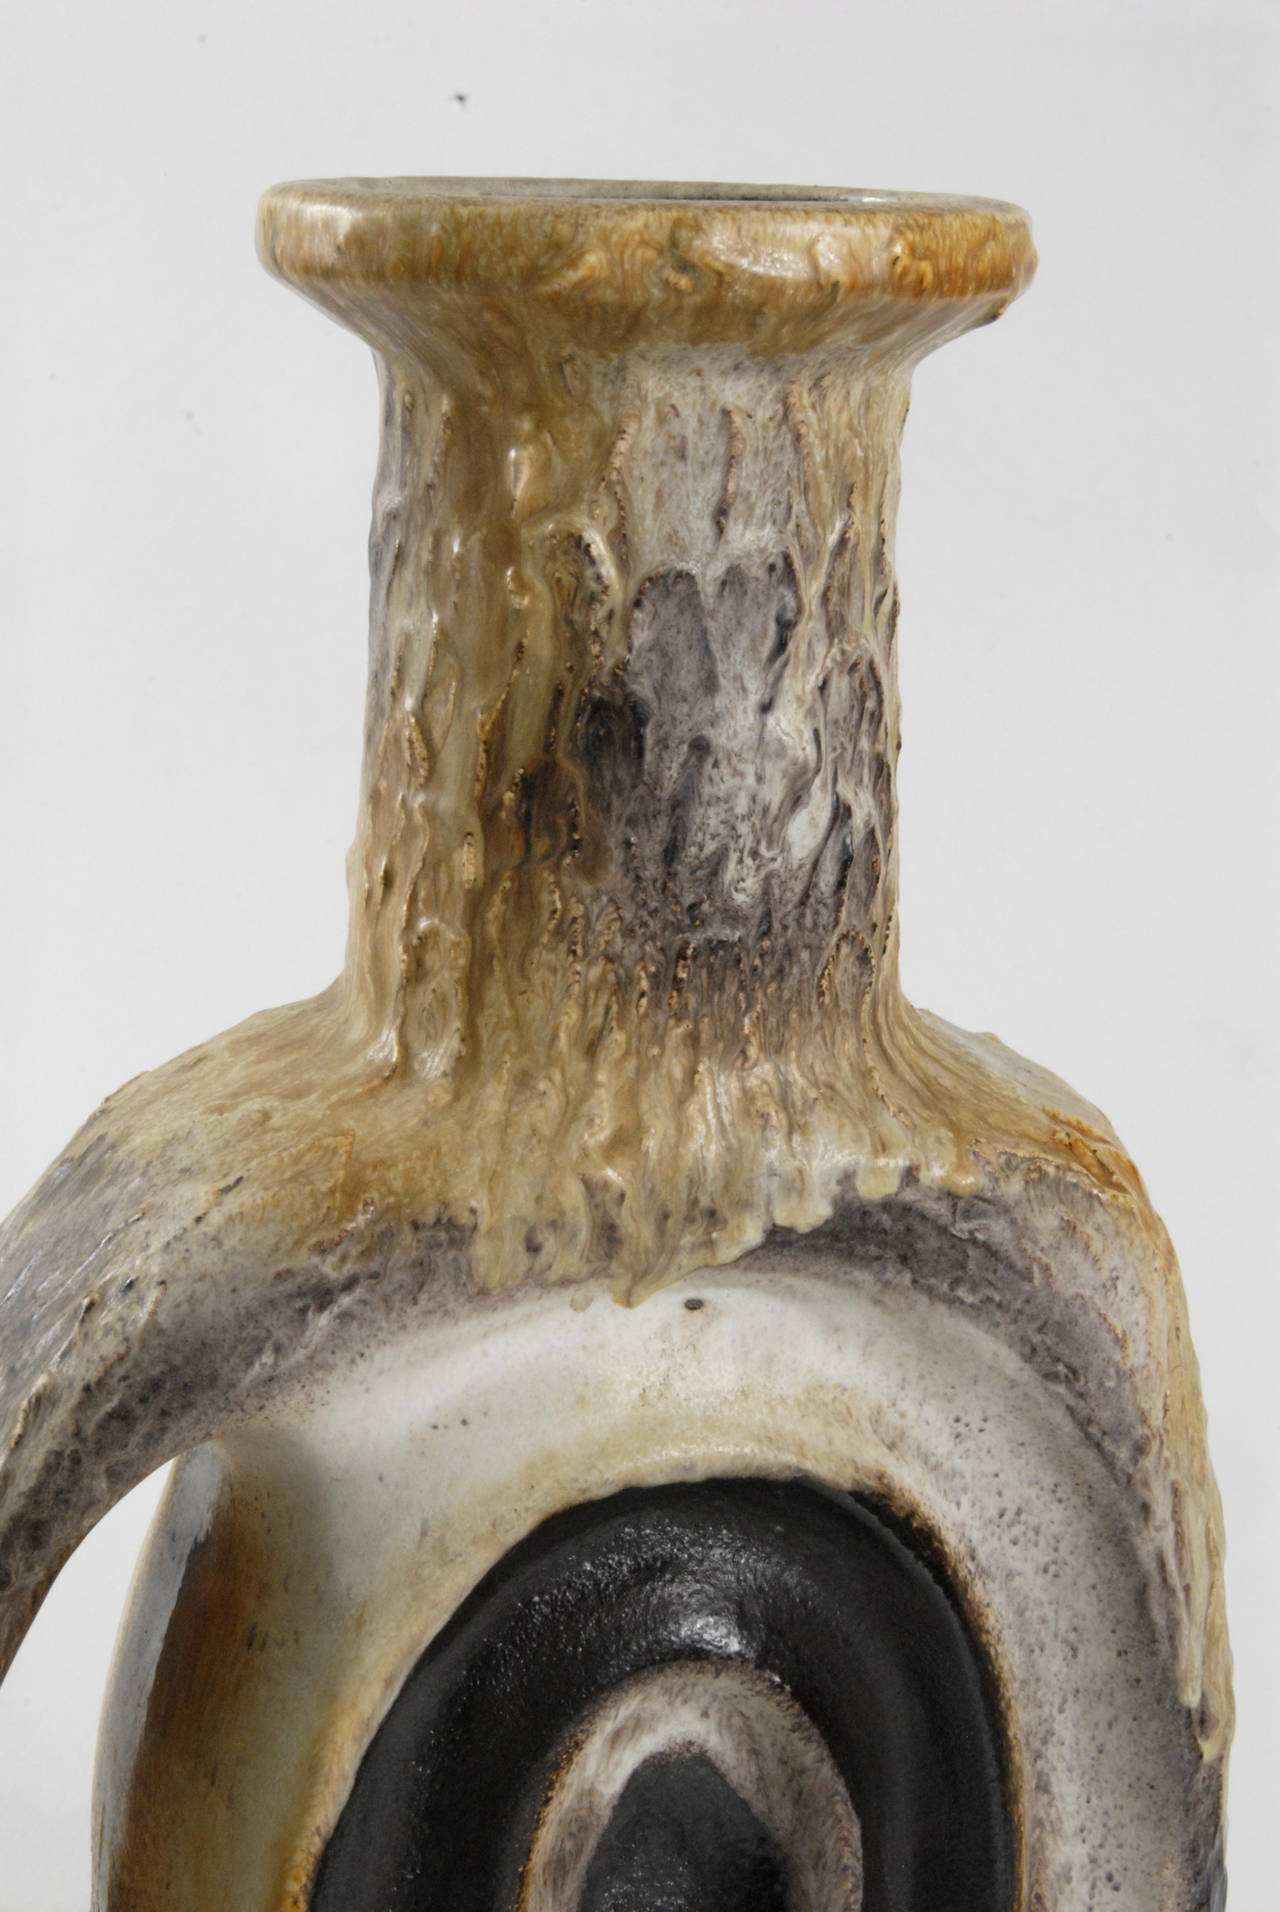 Hand built vase by Walther Becht, marked U9/45, circa 1960.